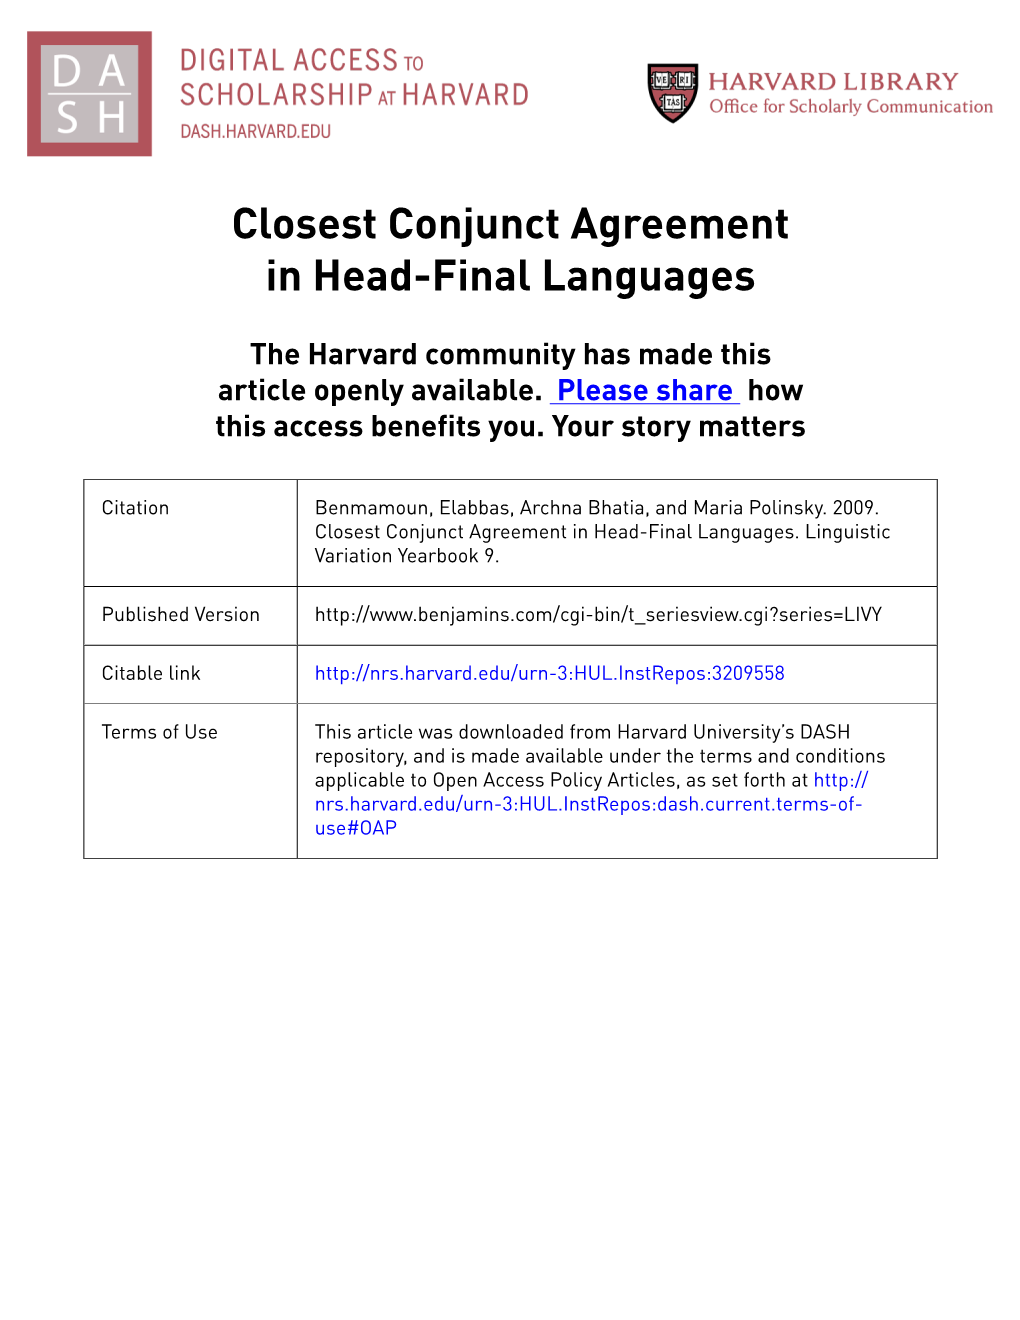 Closest Conjunct Agreement in Head-Final Languages